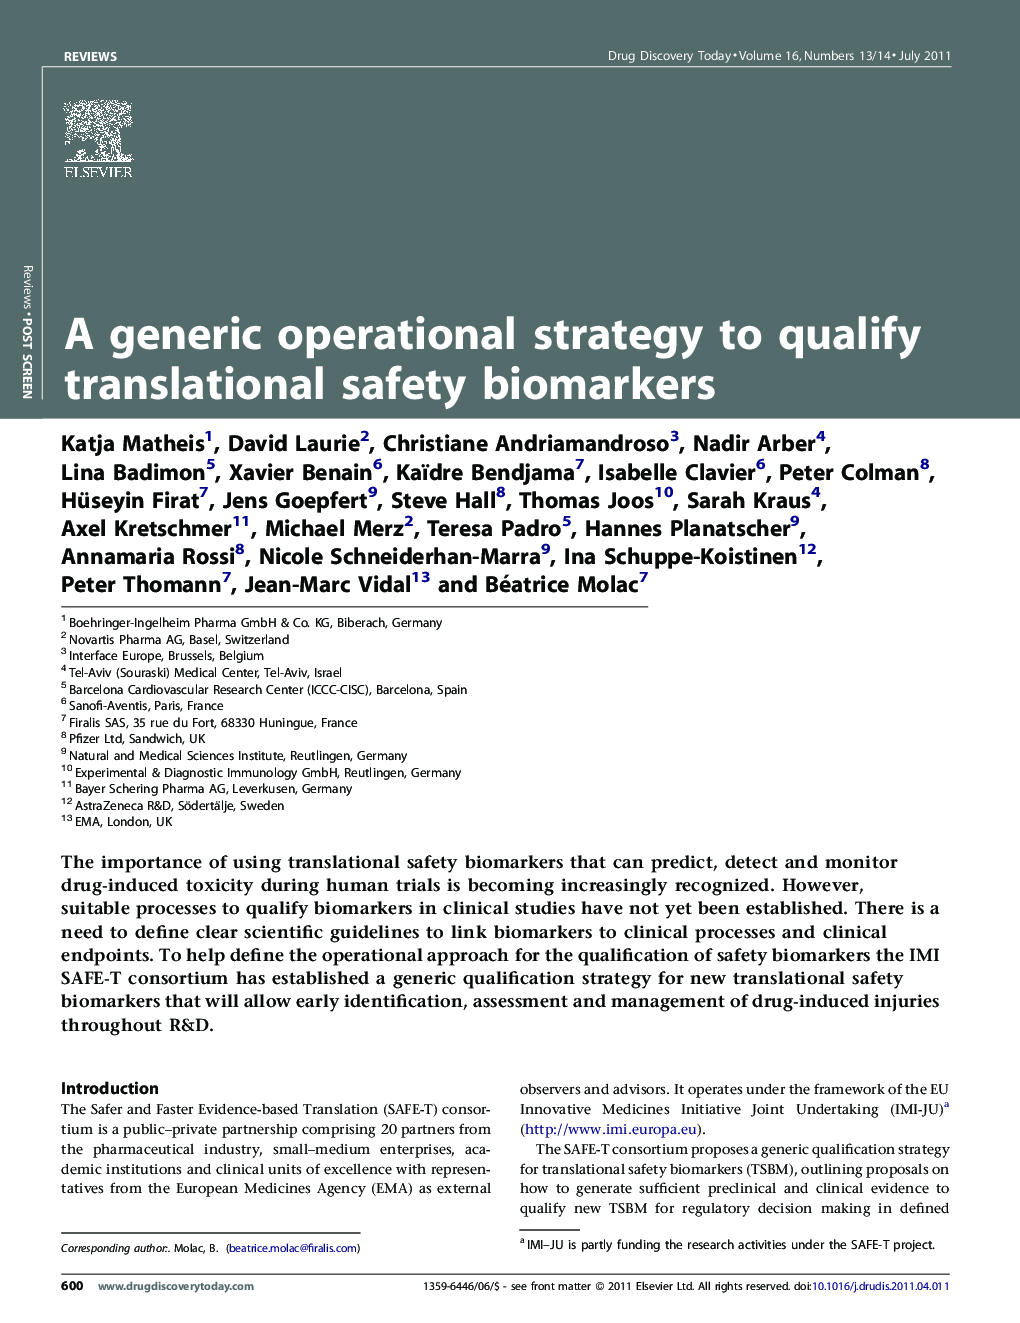 A generic operational strategy to qualify translational safety biomarkers